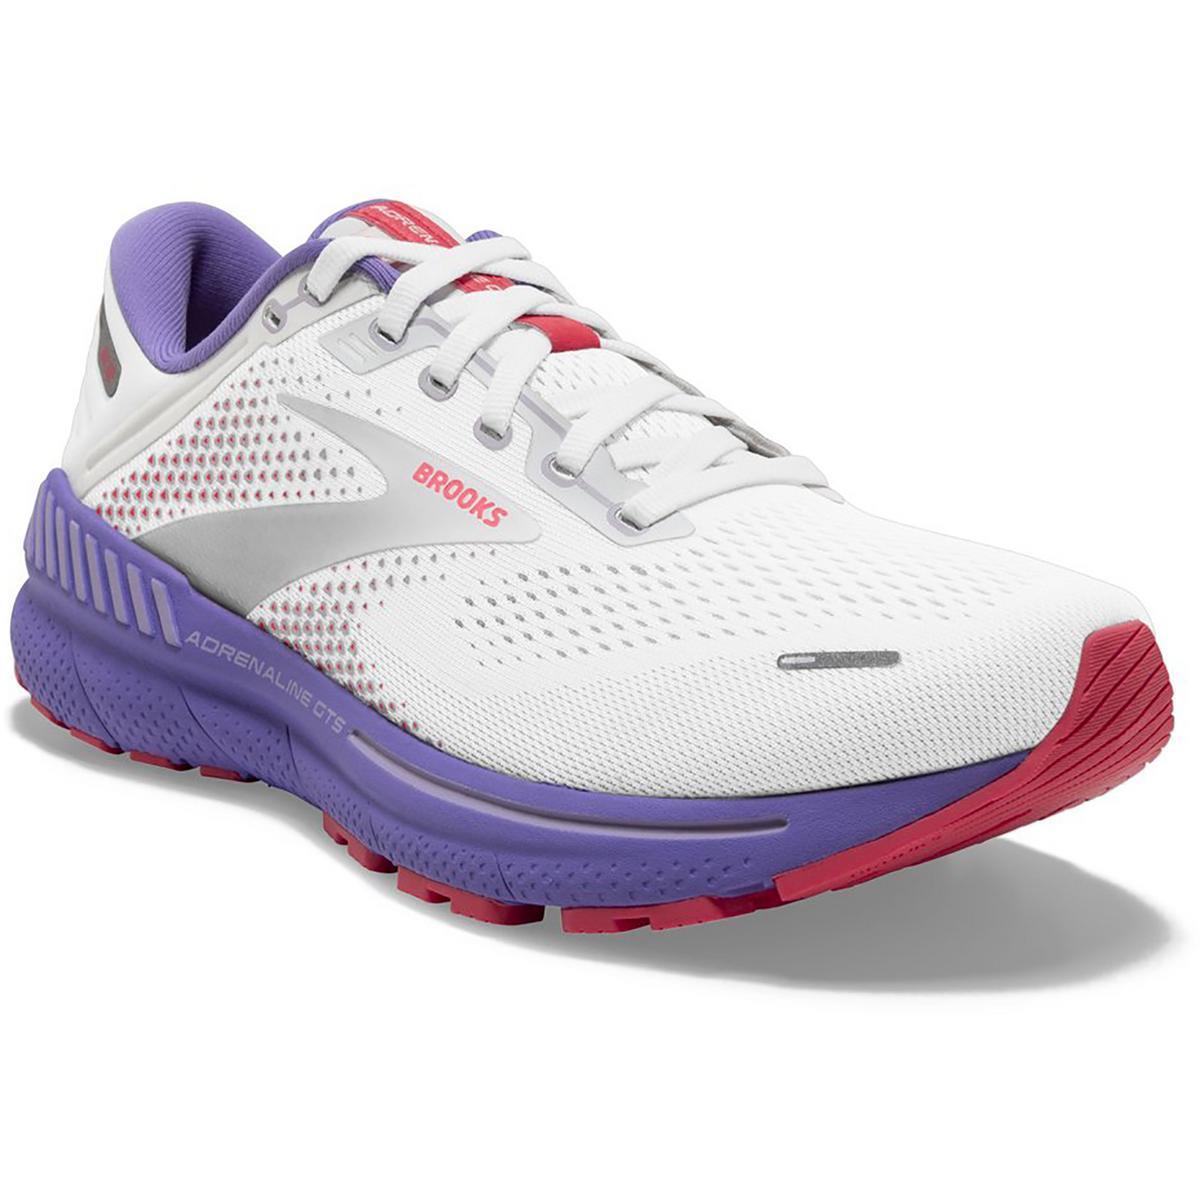 Brooks Womens Adrenaline Gts 22 Athletic and Training Shoes Sneakers Bhfo 7537 White/Coral/Purple